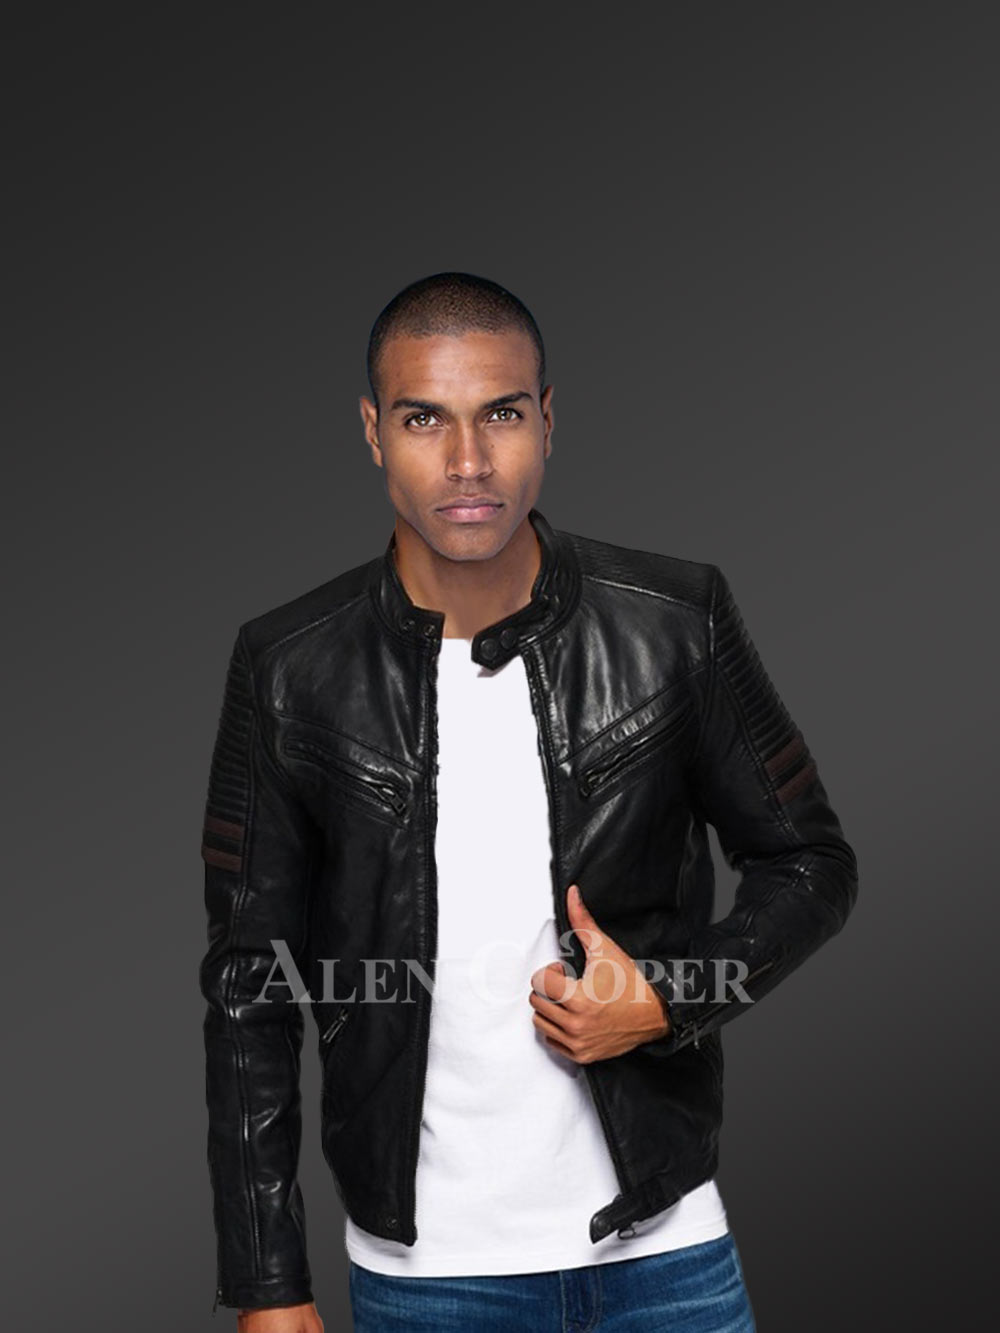 Men's Leather Jackets - Buy Real Leather Jackets For Men